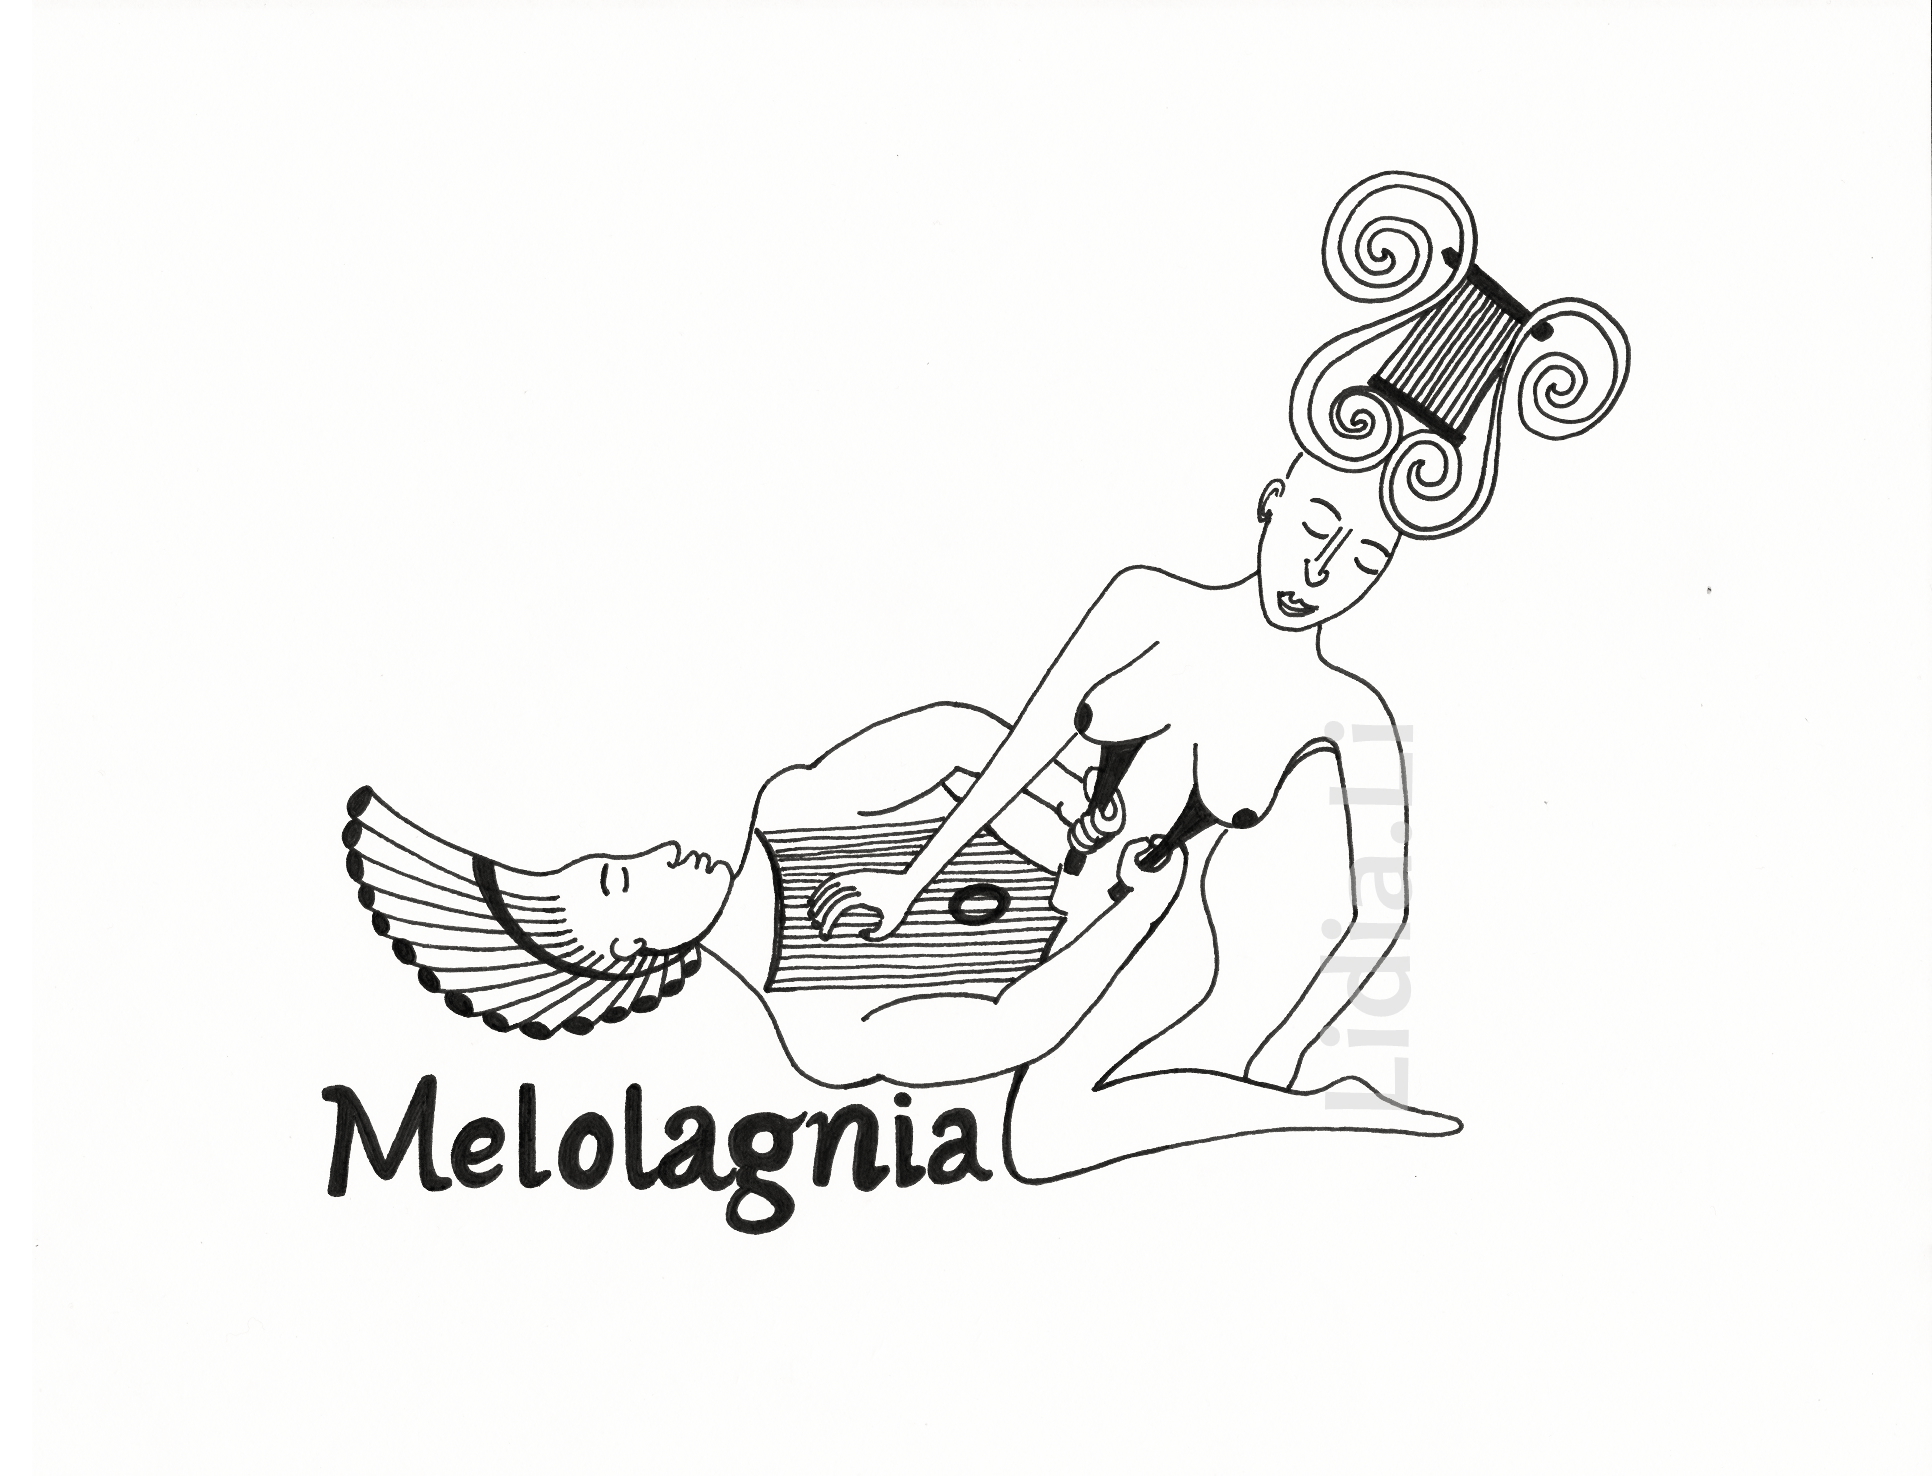 Melolagnia = sexual arousal caused by music